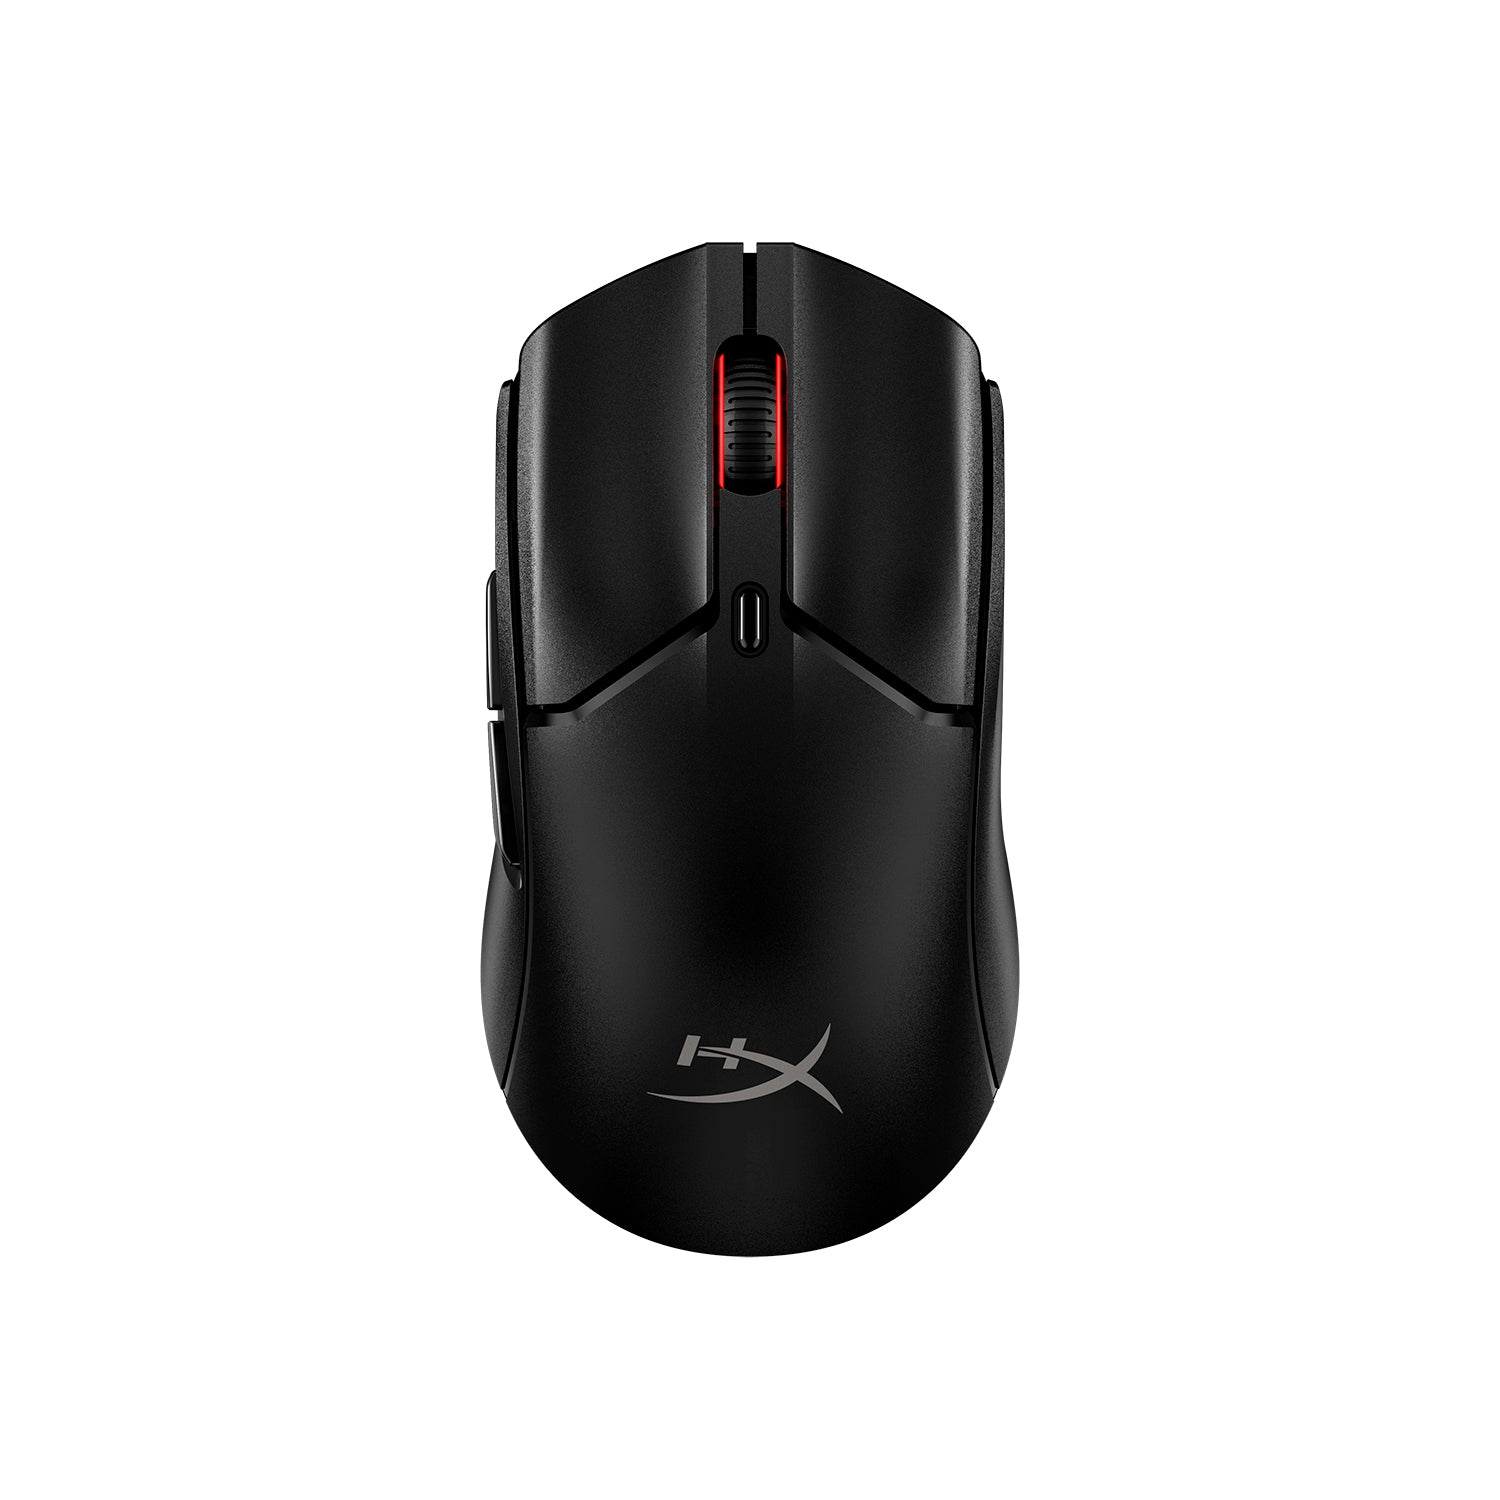 HyperX Pulsefire Haste 2 Mini Wireless Black Gaming Mouse - main view from above